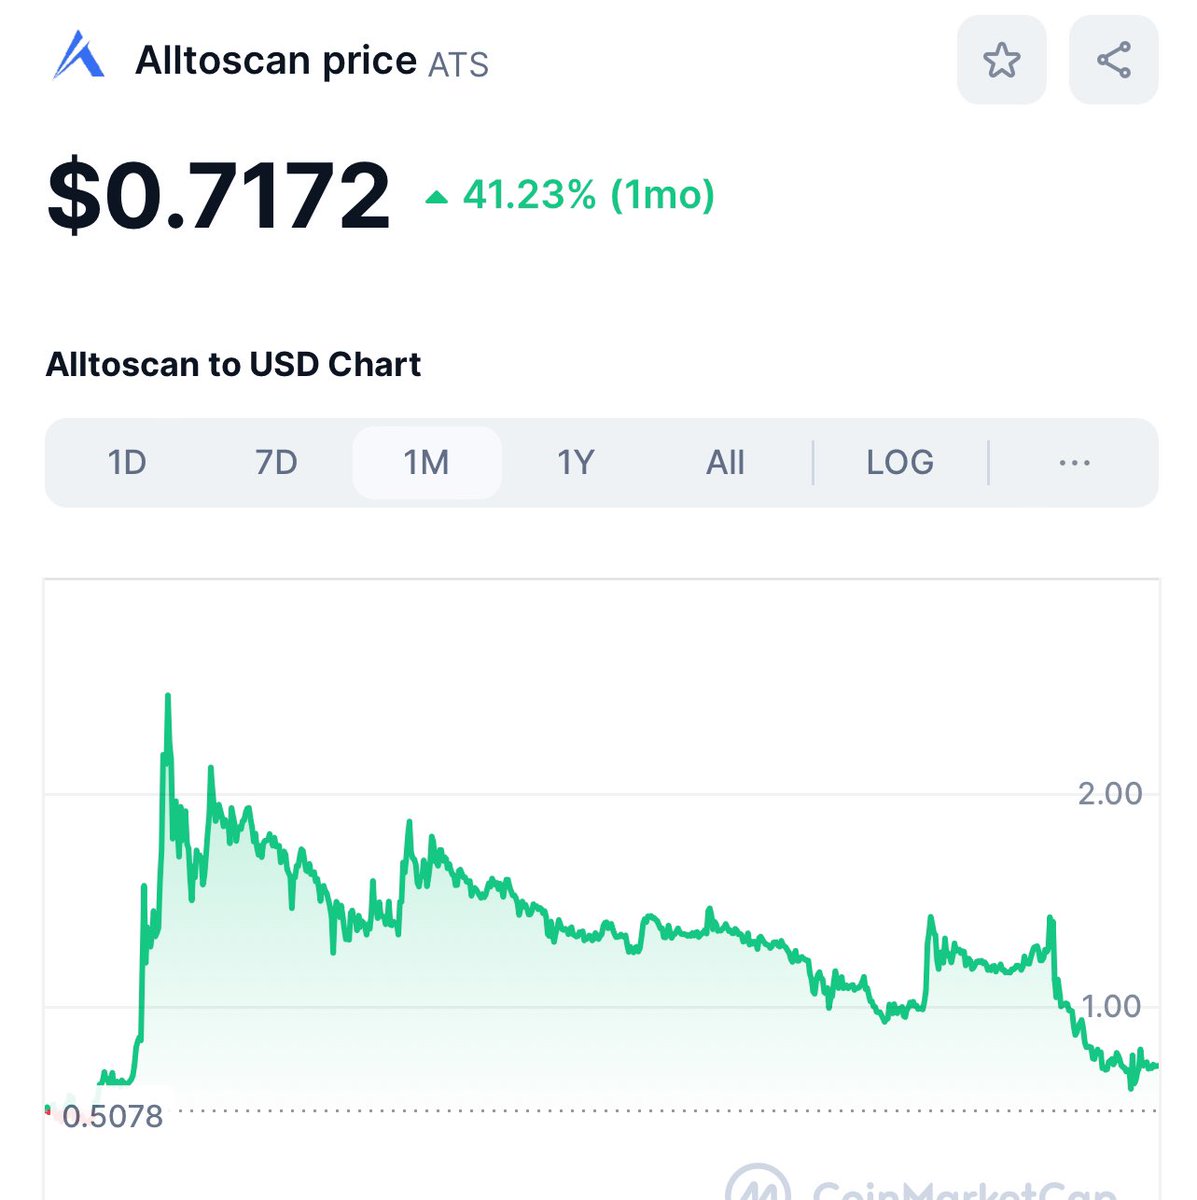 $ATS already raised 100% from my first post and trading at 0.7$ and planning to hit 5-6$ in long term hold ✅